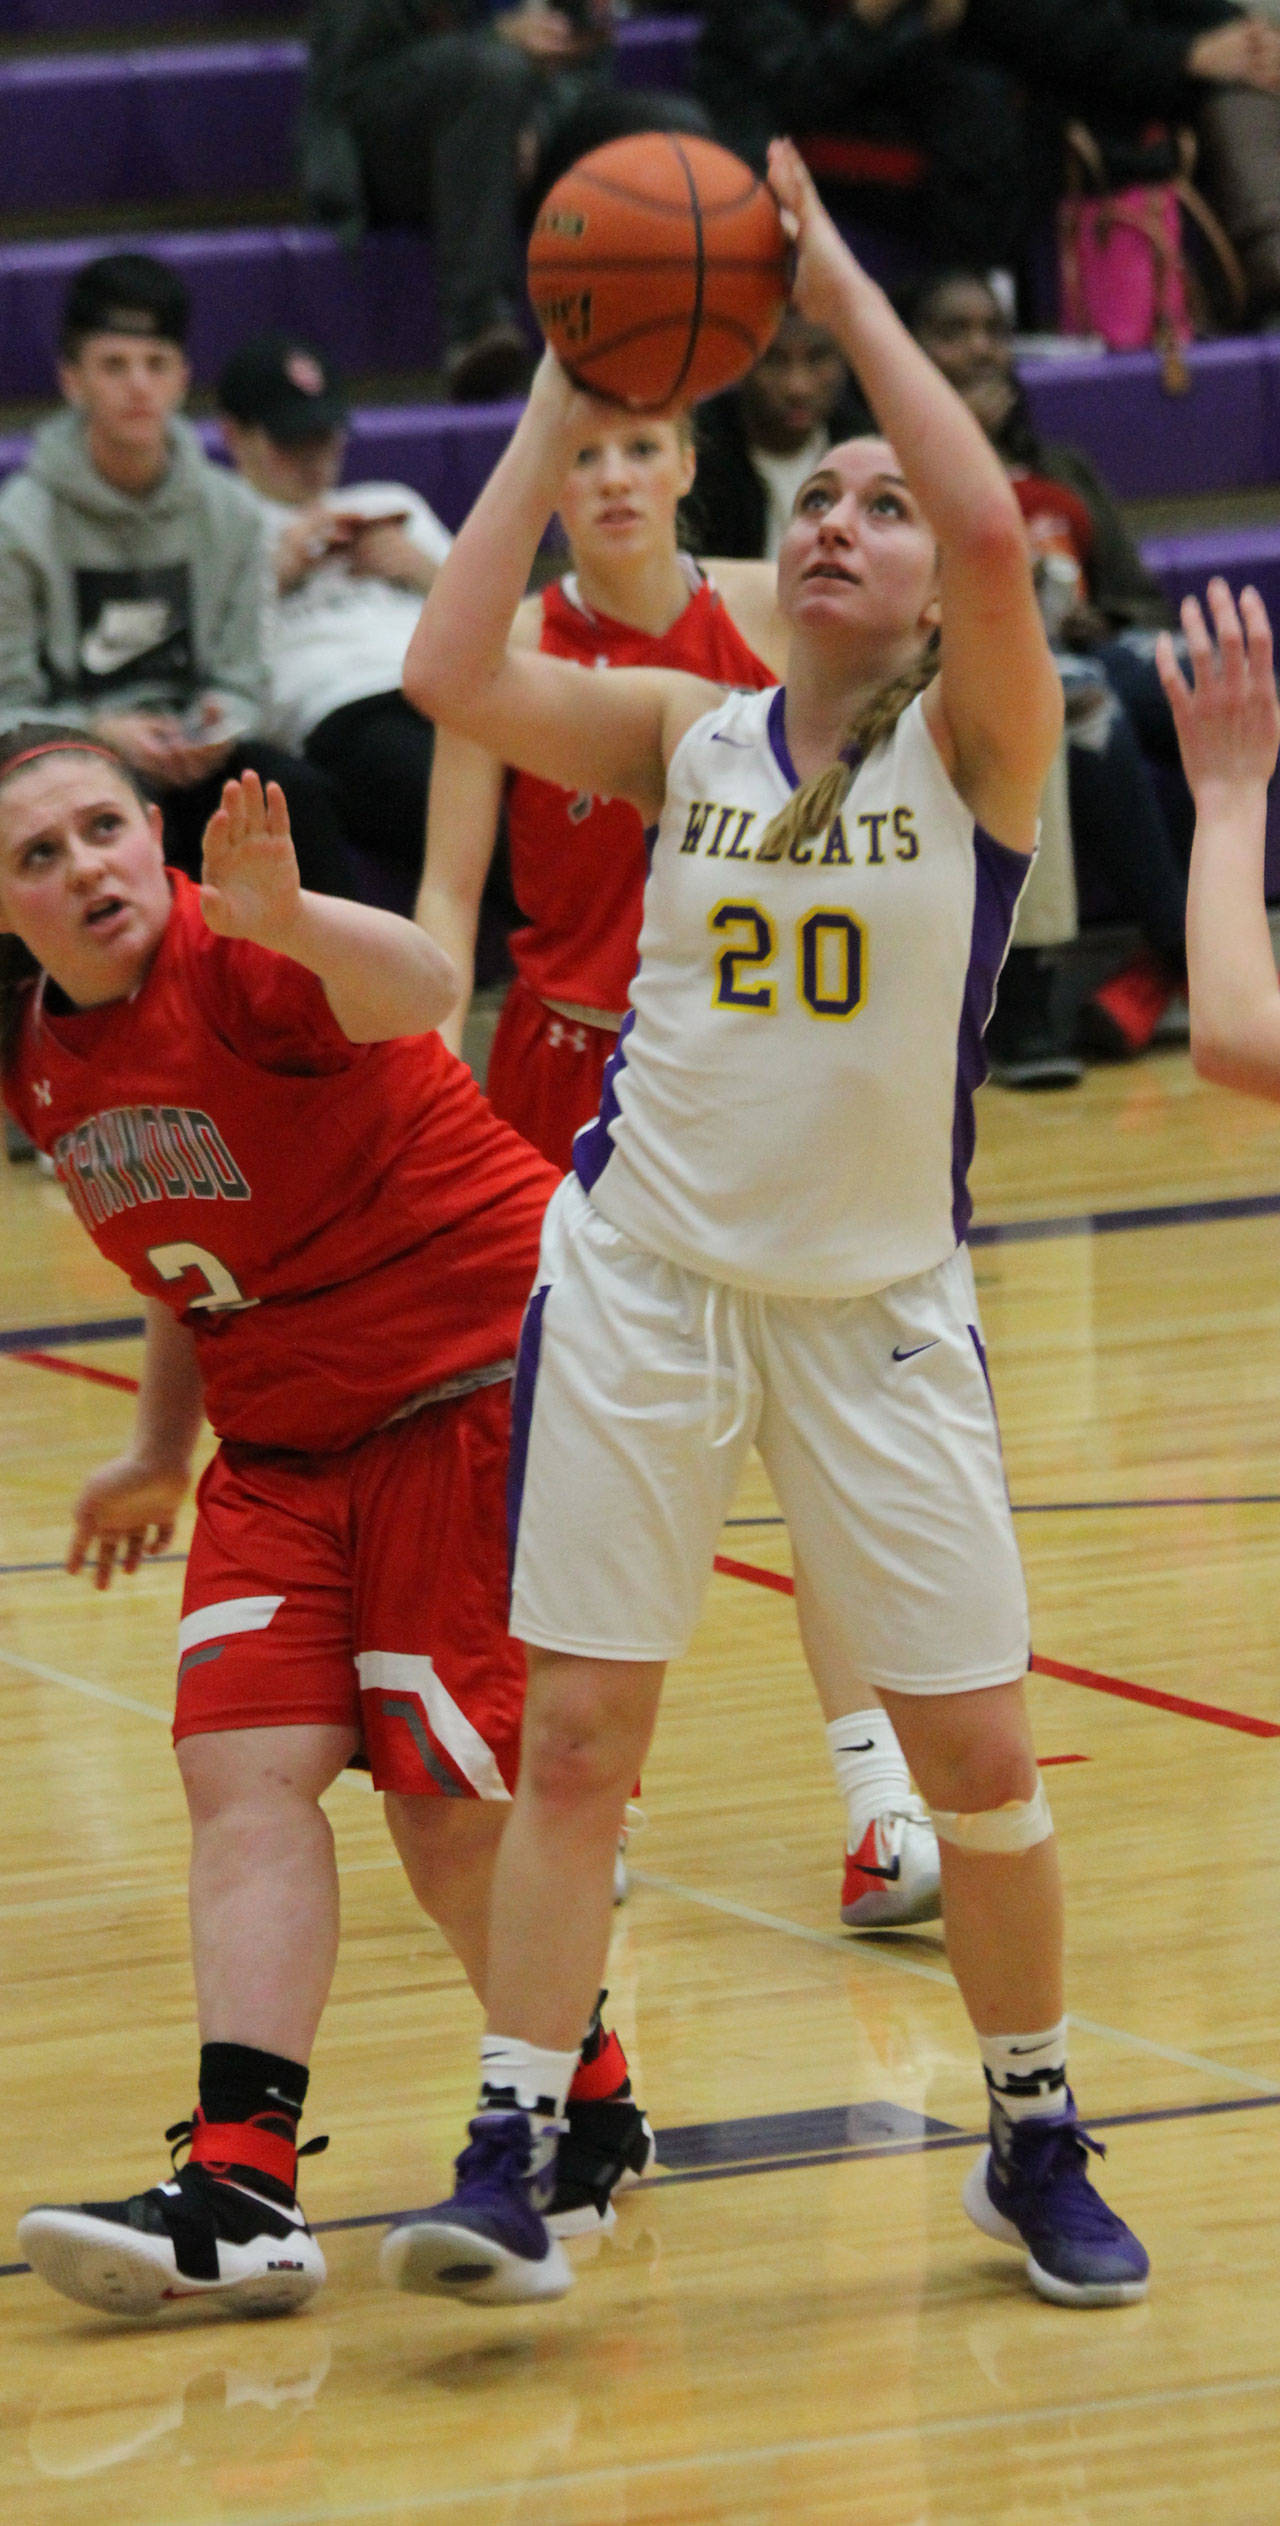 After grabbing an offensive rebound, Samantha Hines (20) puts up a shot over Stanwood’s Allie Jones. (Photo by Jim Waller/Whidbey News-Times)